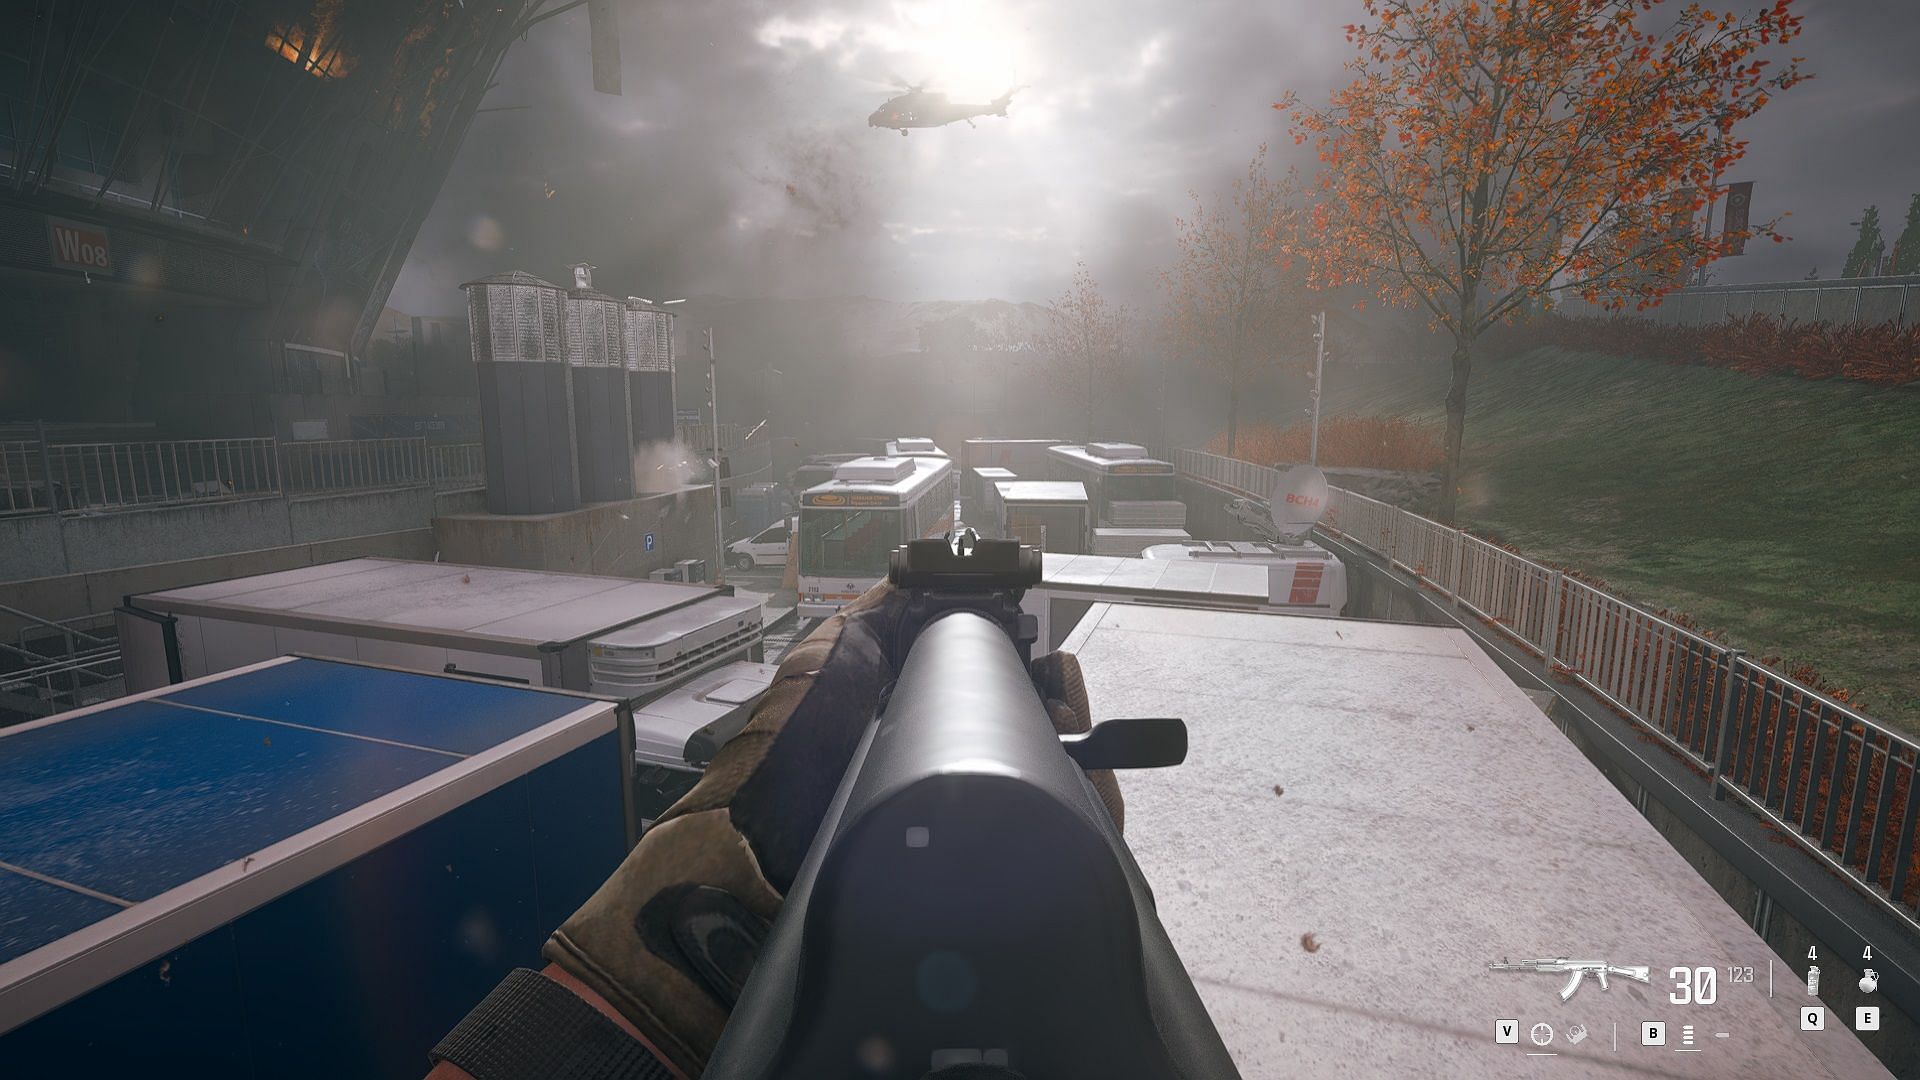 Taking out enemies from the top of a bus in Modern Warfare 3 campaign mission 8 